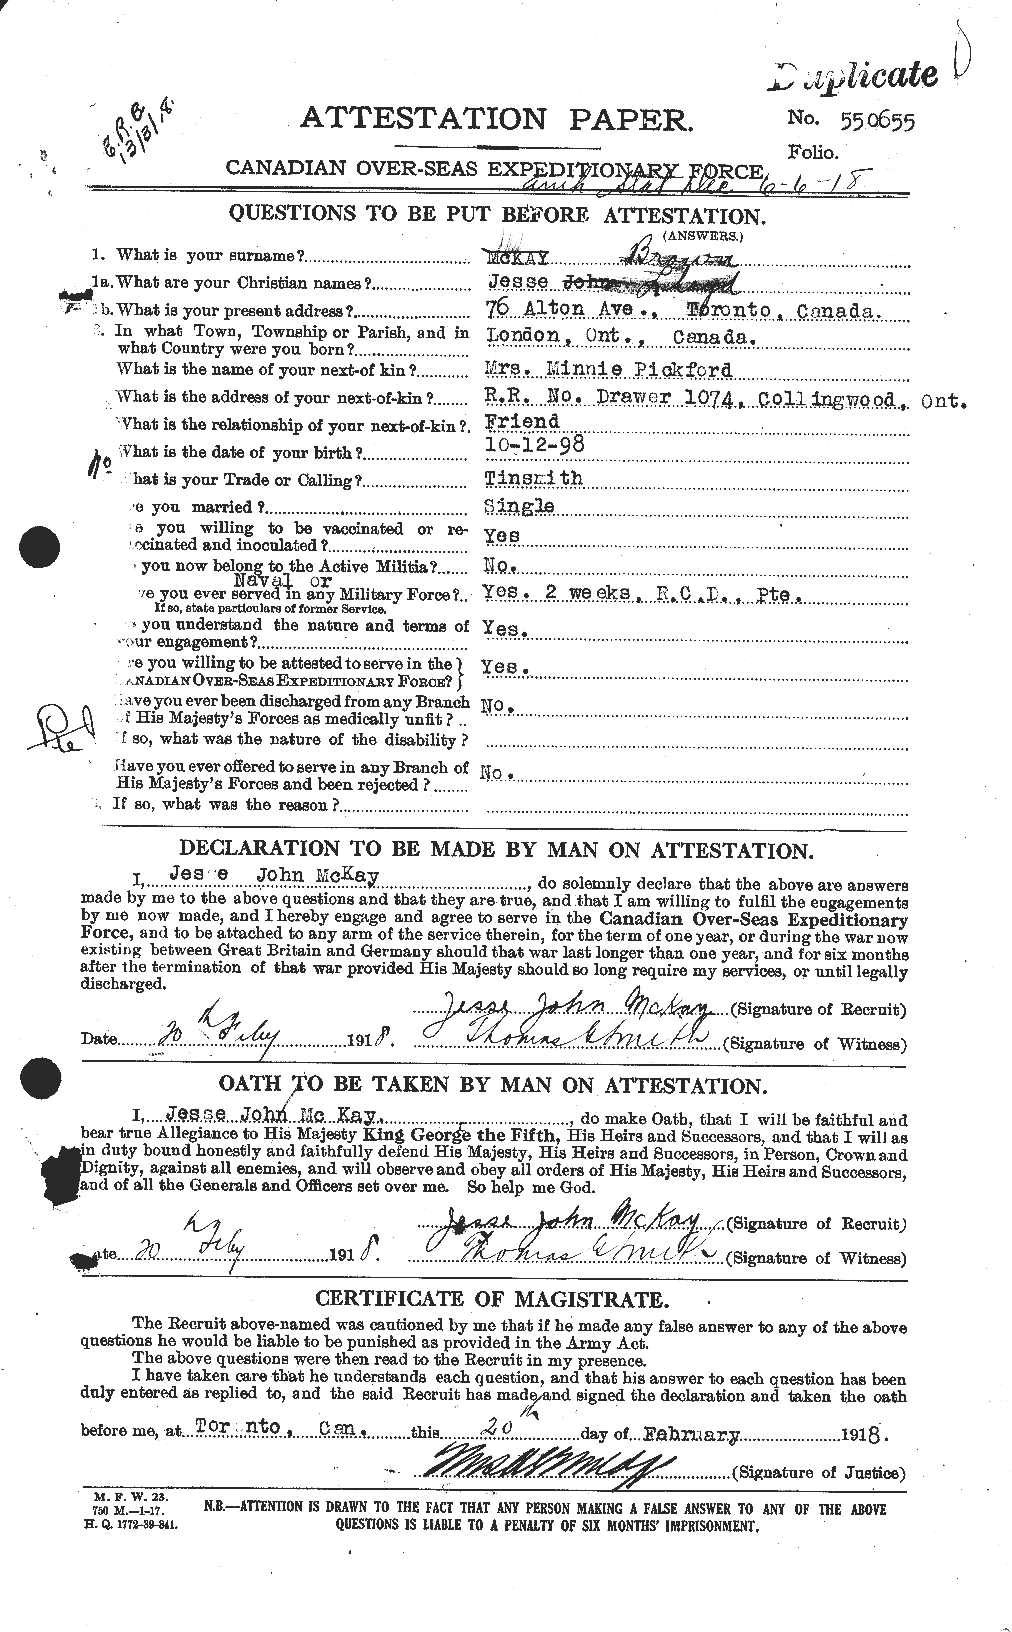 Personnel Records of the First World War - CEF 269617a